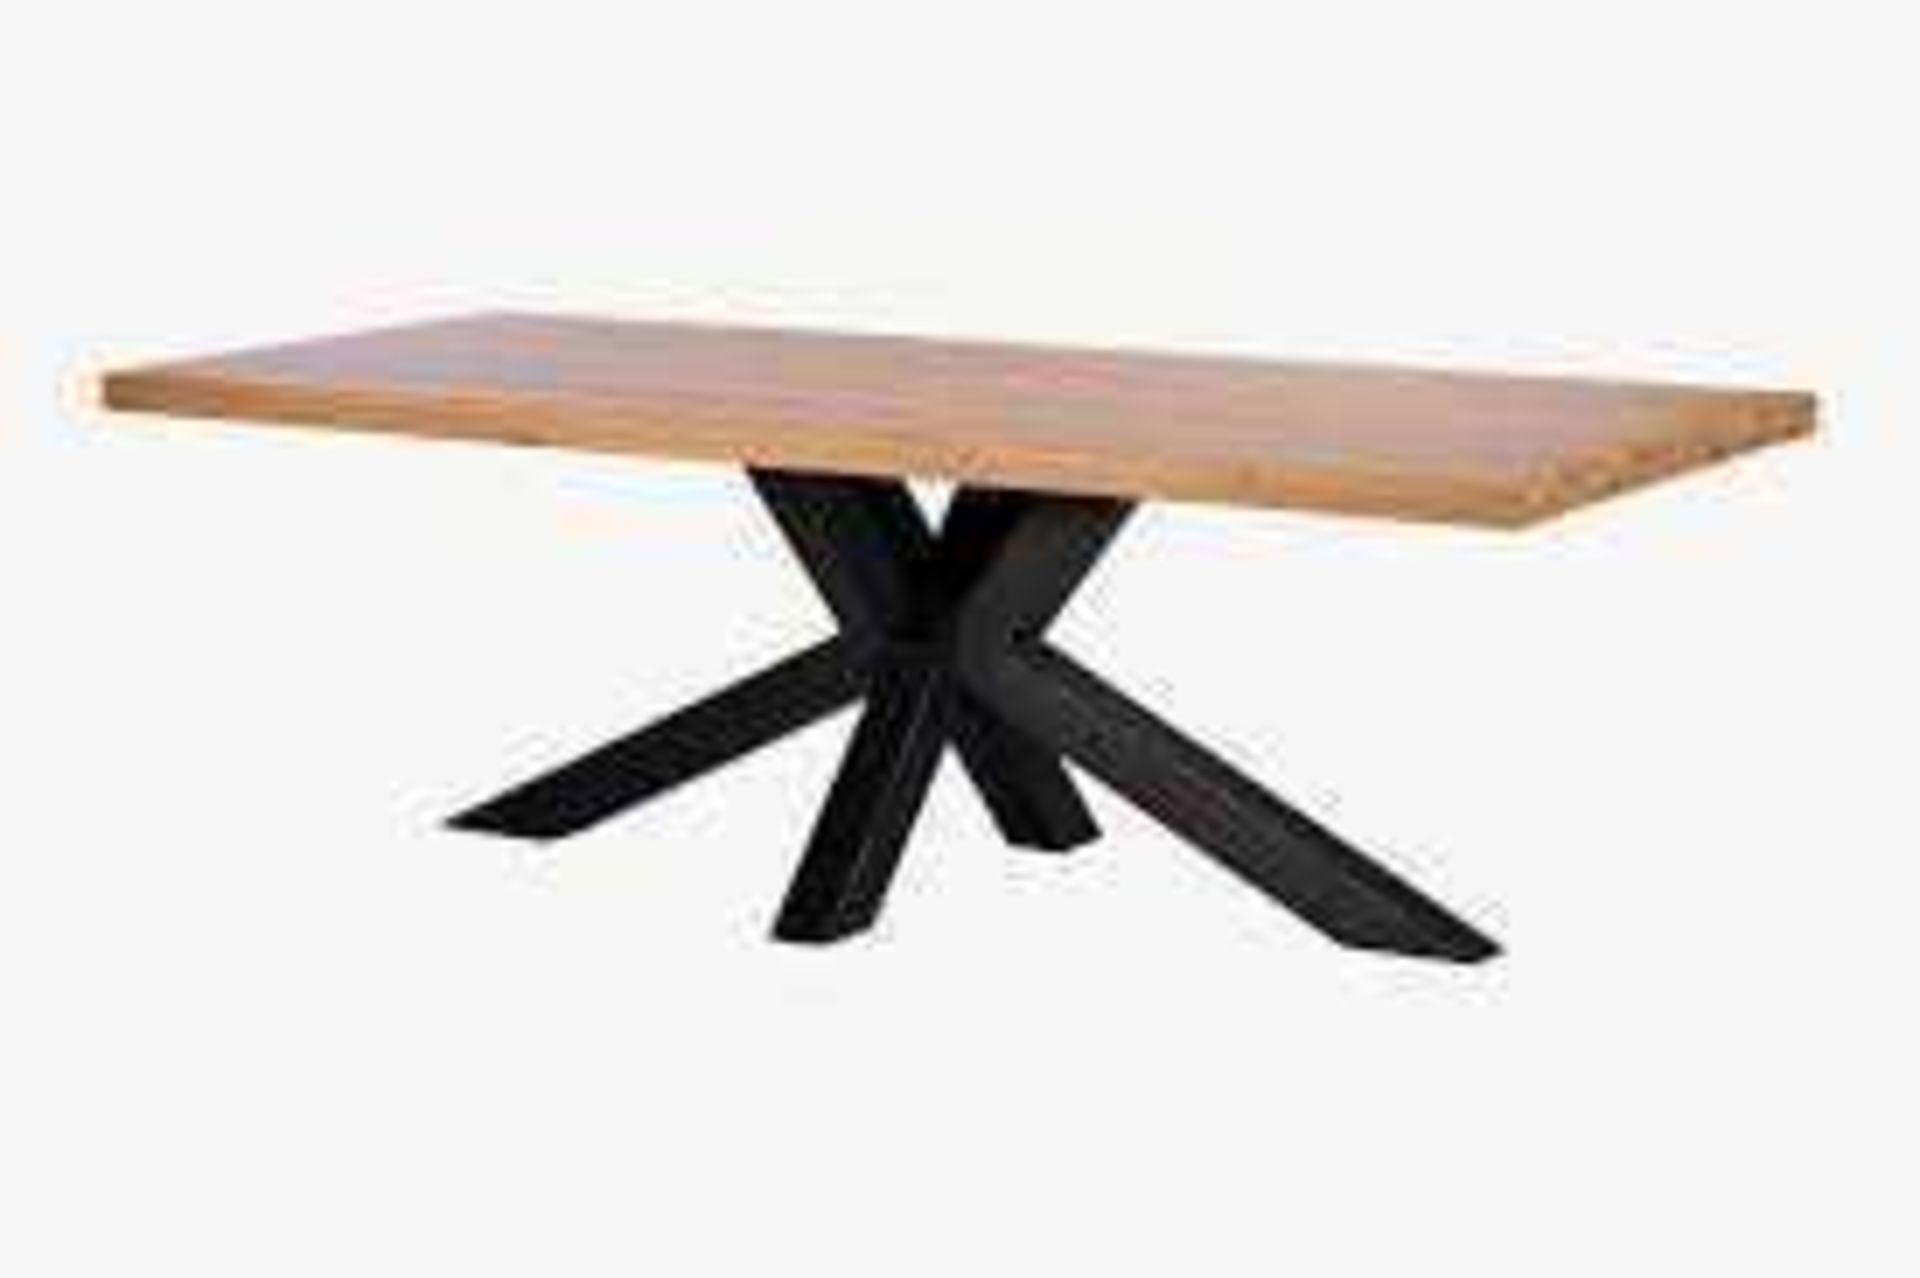 RRP £1200 Boxed Brand New Arighi Bianchi Ja7304 Black And White Carrera Ceramic Dining Table